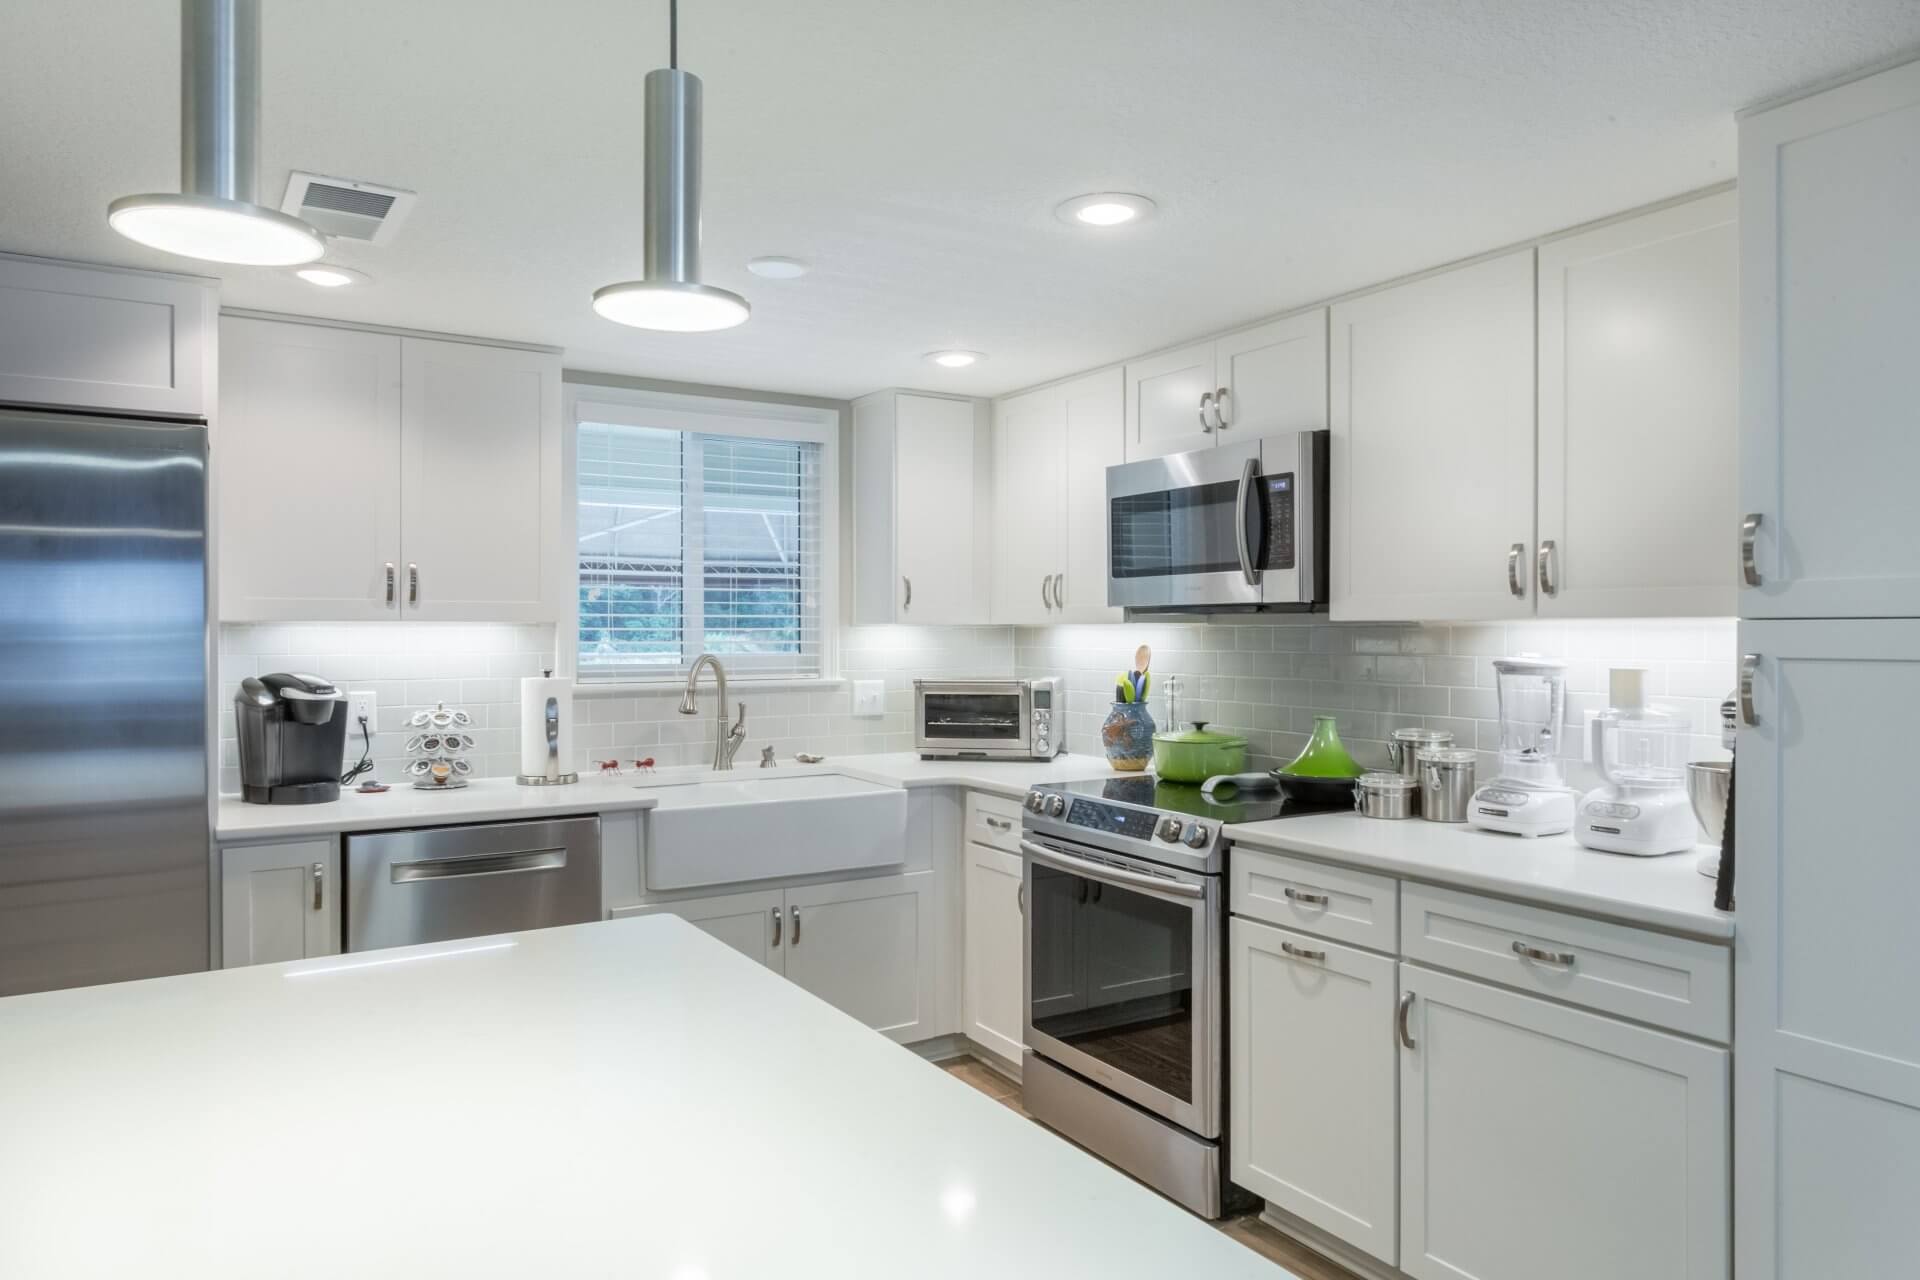 Modern light fixtures accent this Pensacola Beach home kitchen remodel